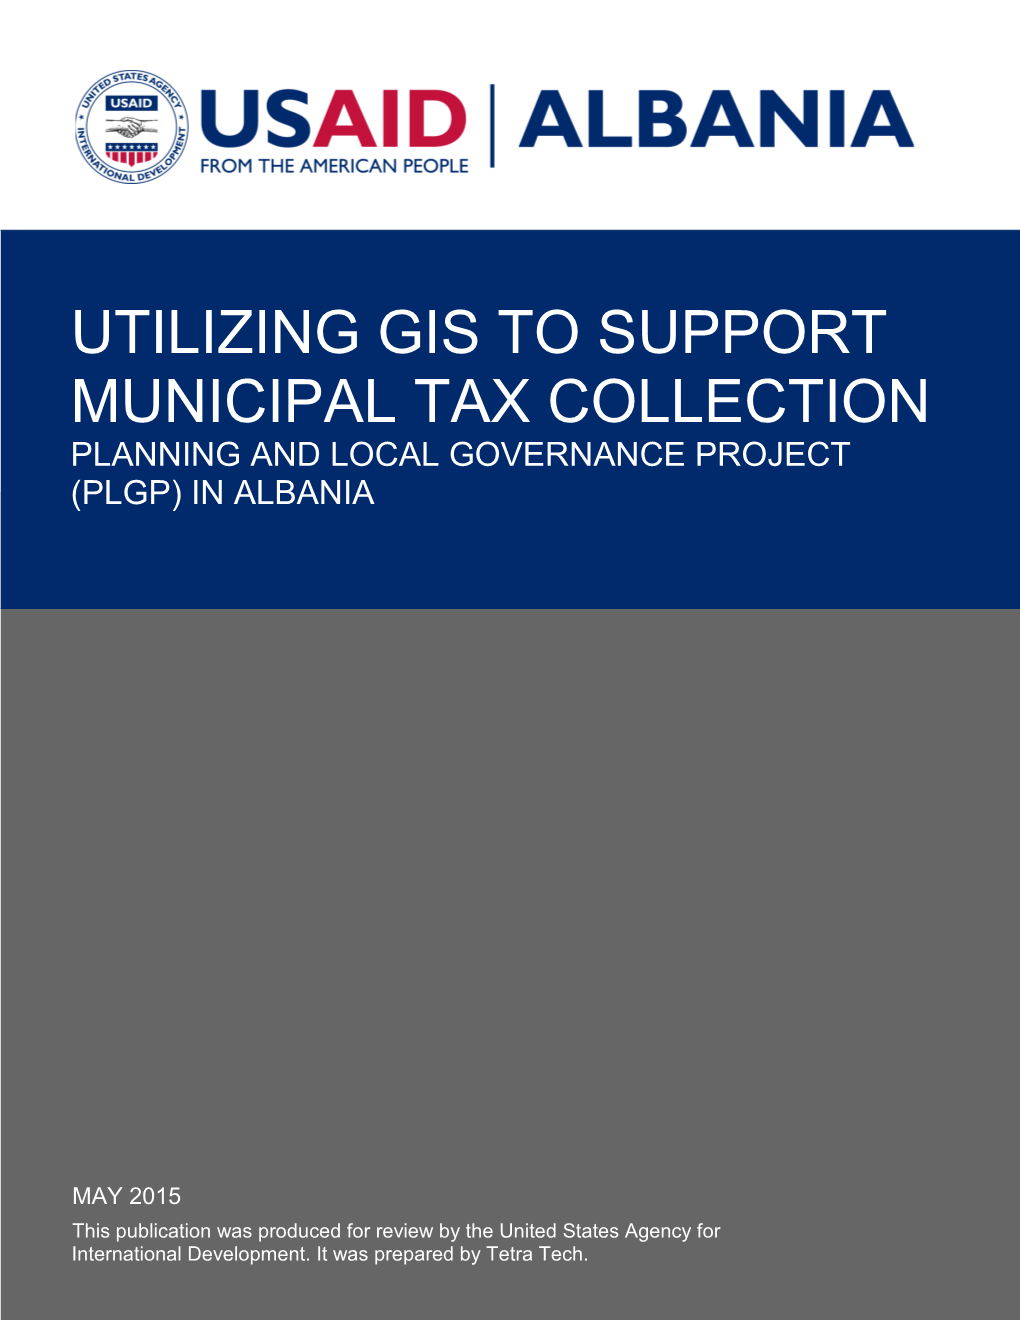 Utilizing Gis to Support Municipal Tax Collection Planning and Local Governance Project (Plgp) in Albania